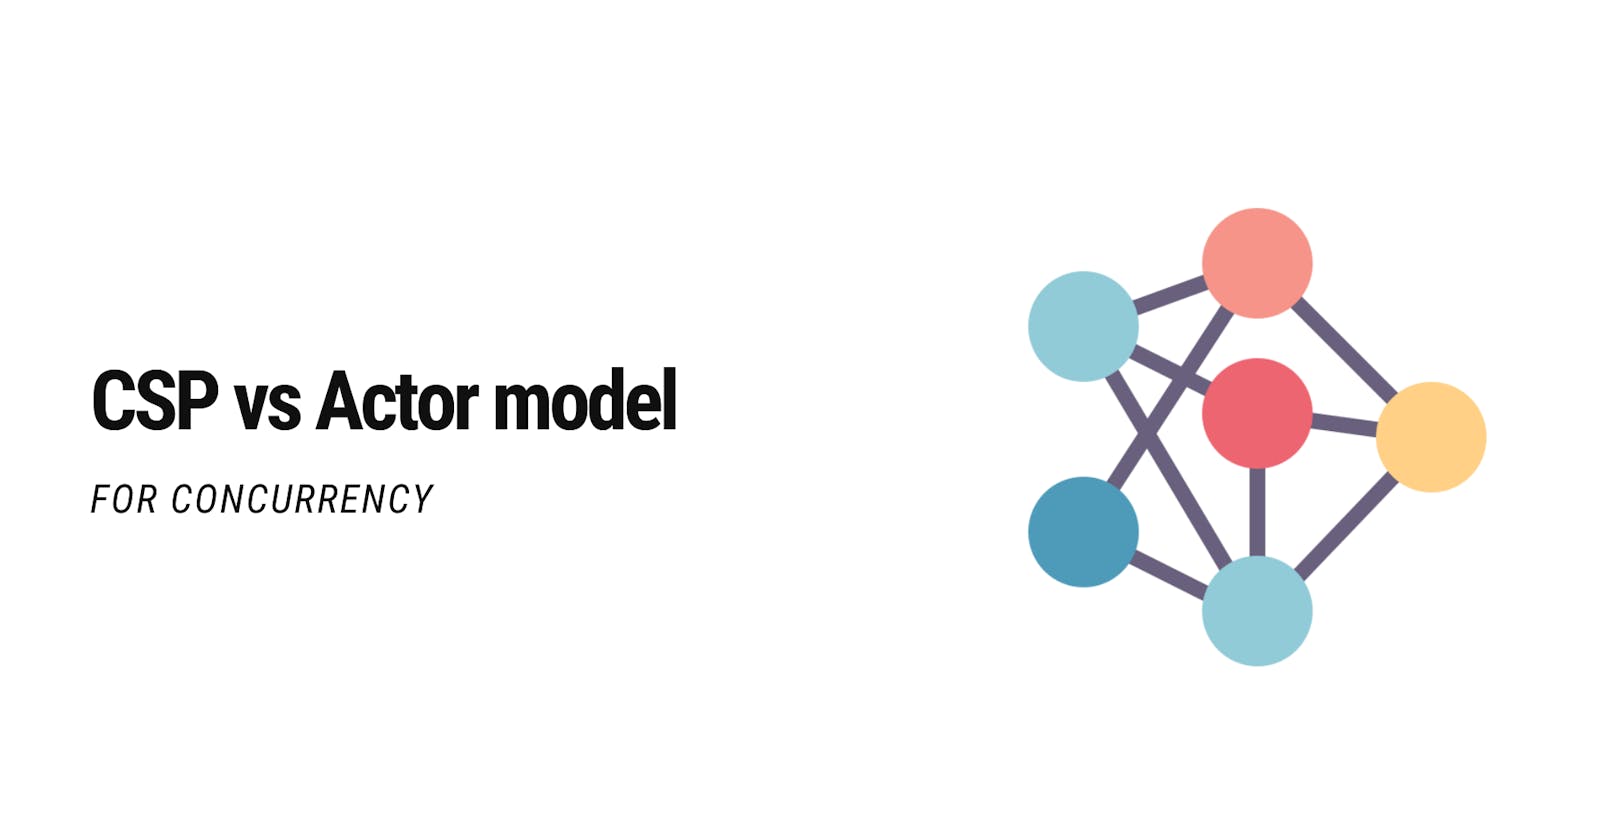 CSP vs Actor model for concurrency